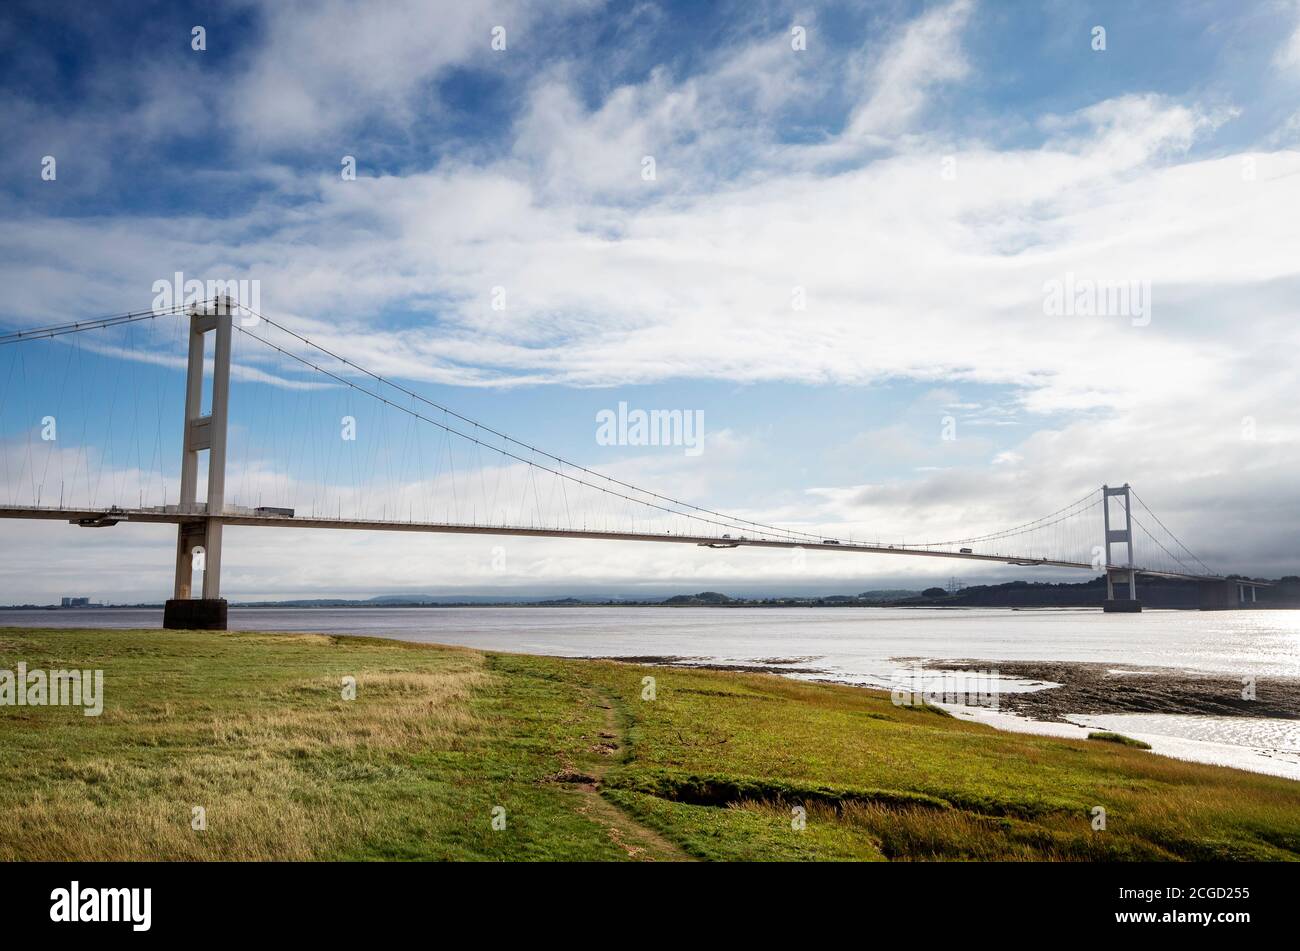 The Severn bridge, M48 motorway suspension bridge linking England and Wales over the River Severn. Stock Photo